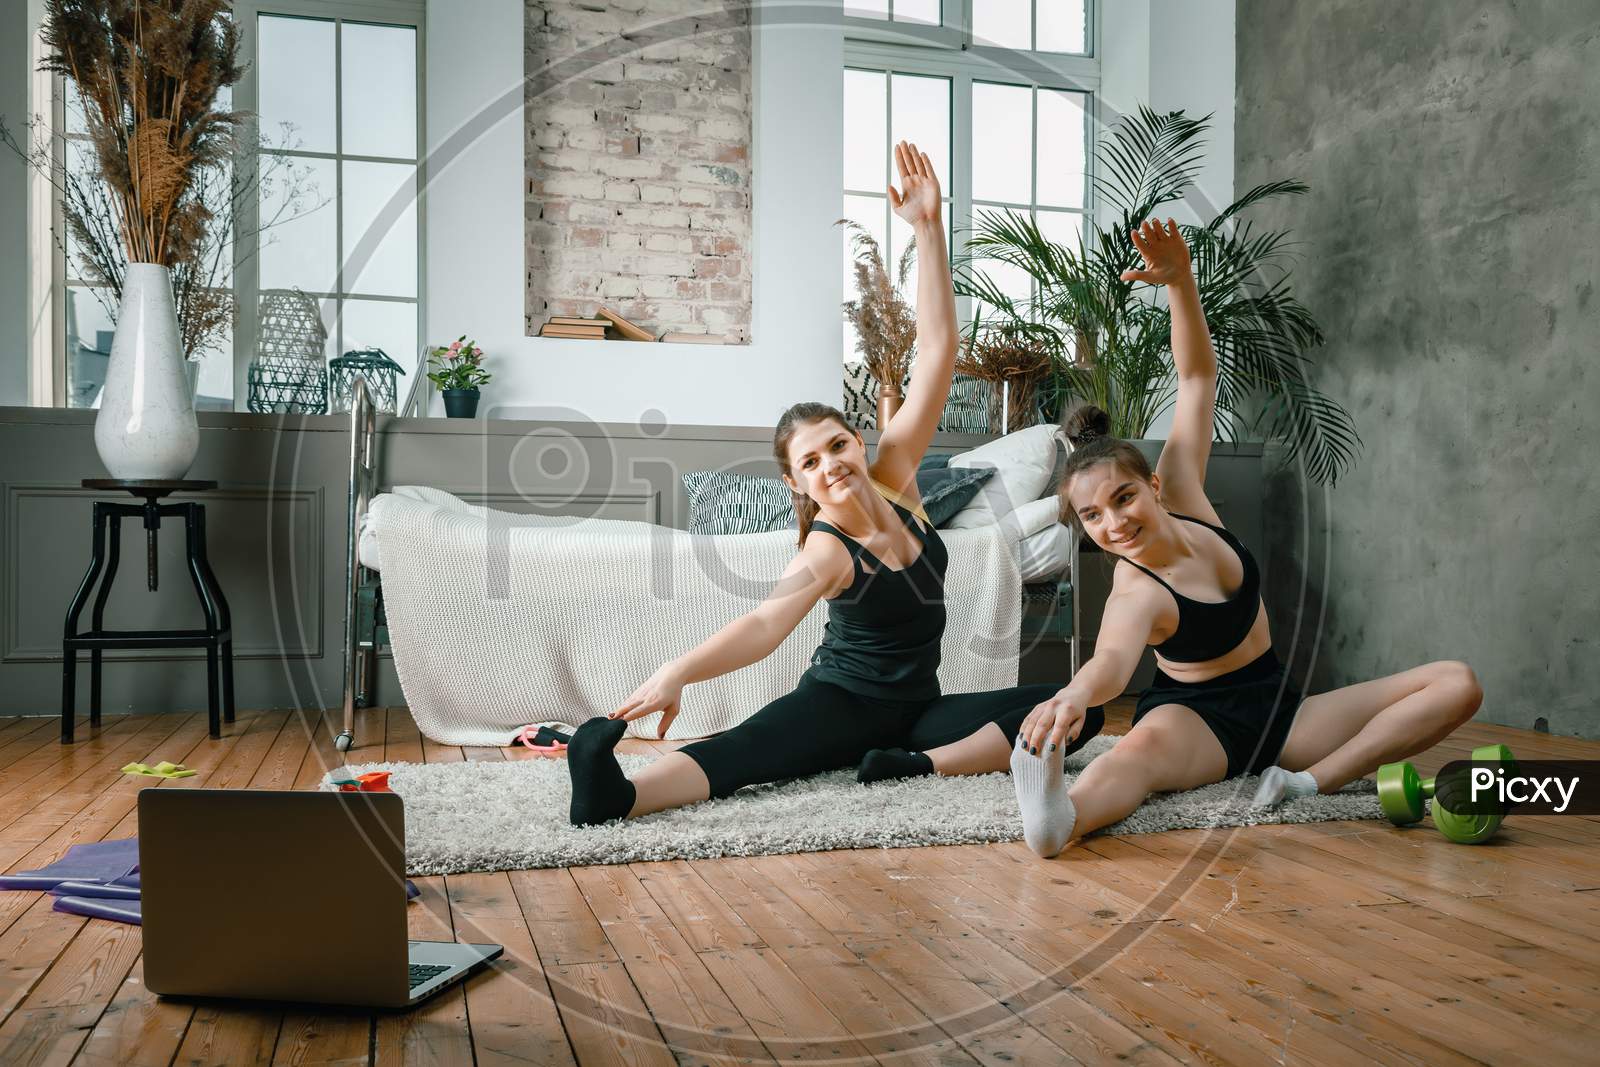 Young Women Go In For Sports At Home, Workout Online. Two Athletes Are Stretching, Meditating  In The Bedroom, In The Background There Is A Bed, A Vase, A Carpet.